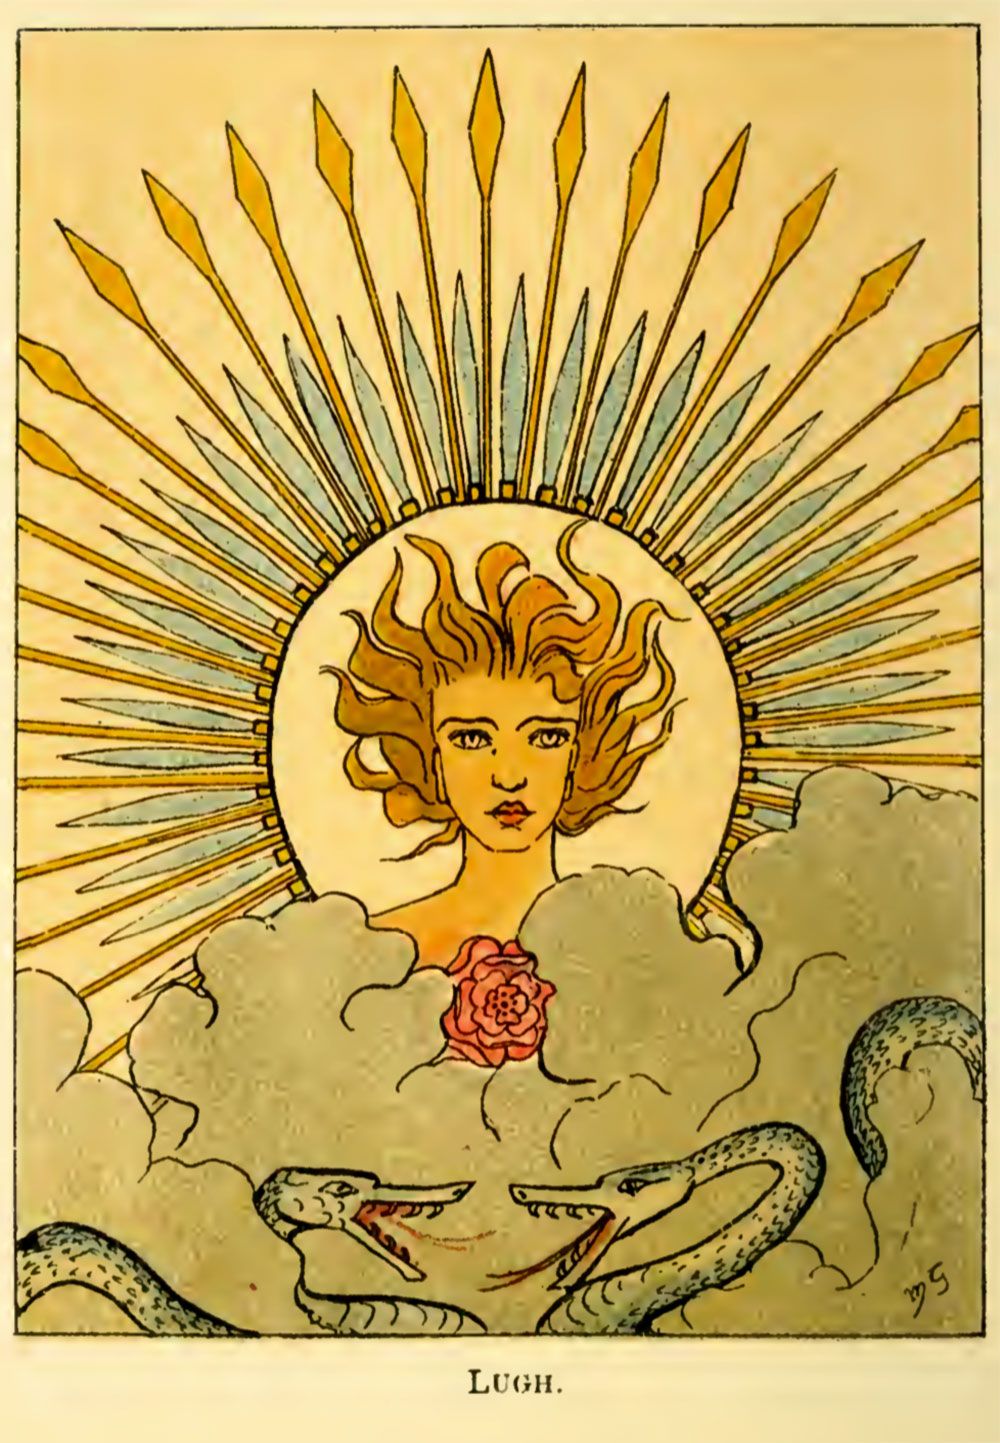 The Coming of Lugh illustrated by Maude Gonne.